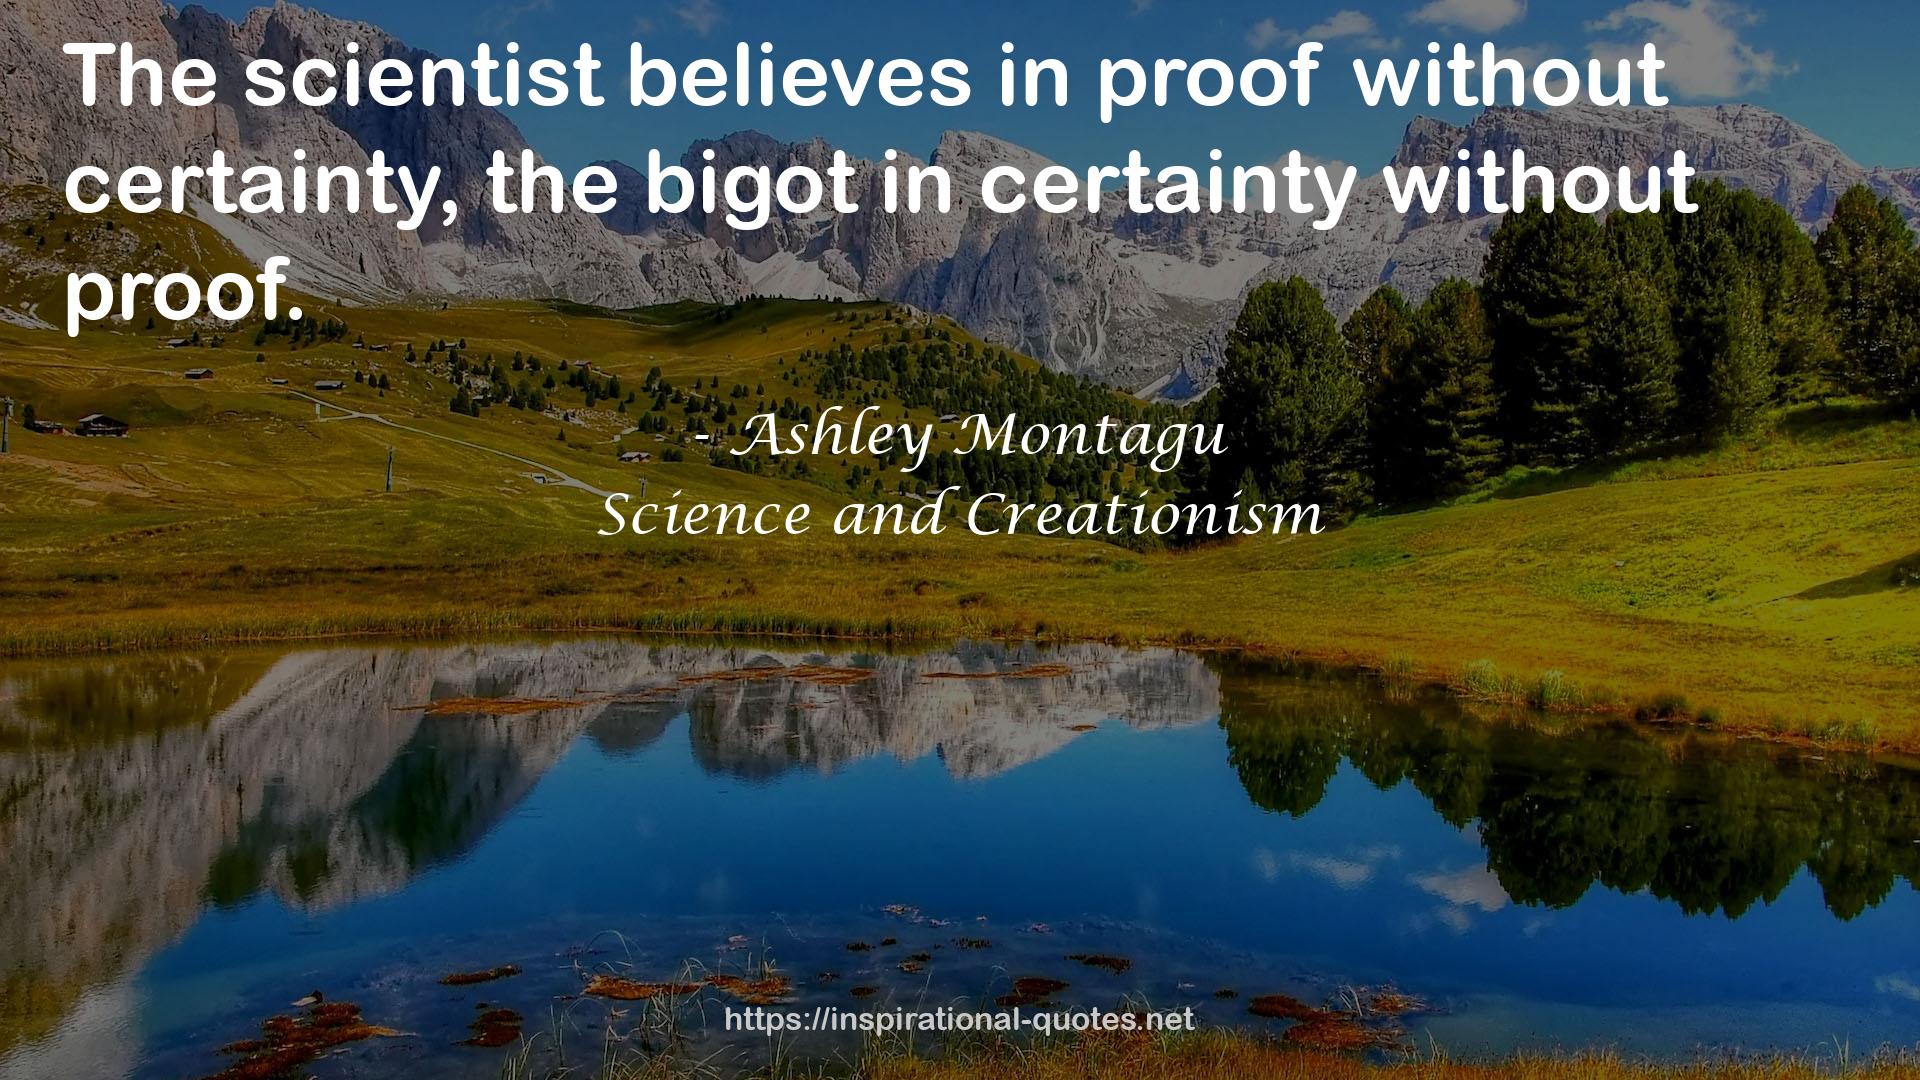 Science and Creationism QUOTES